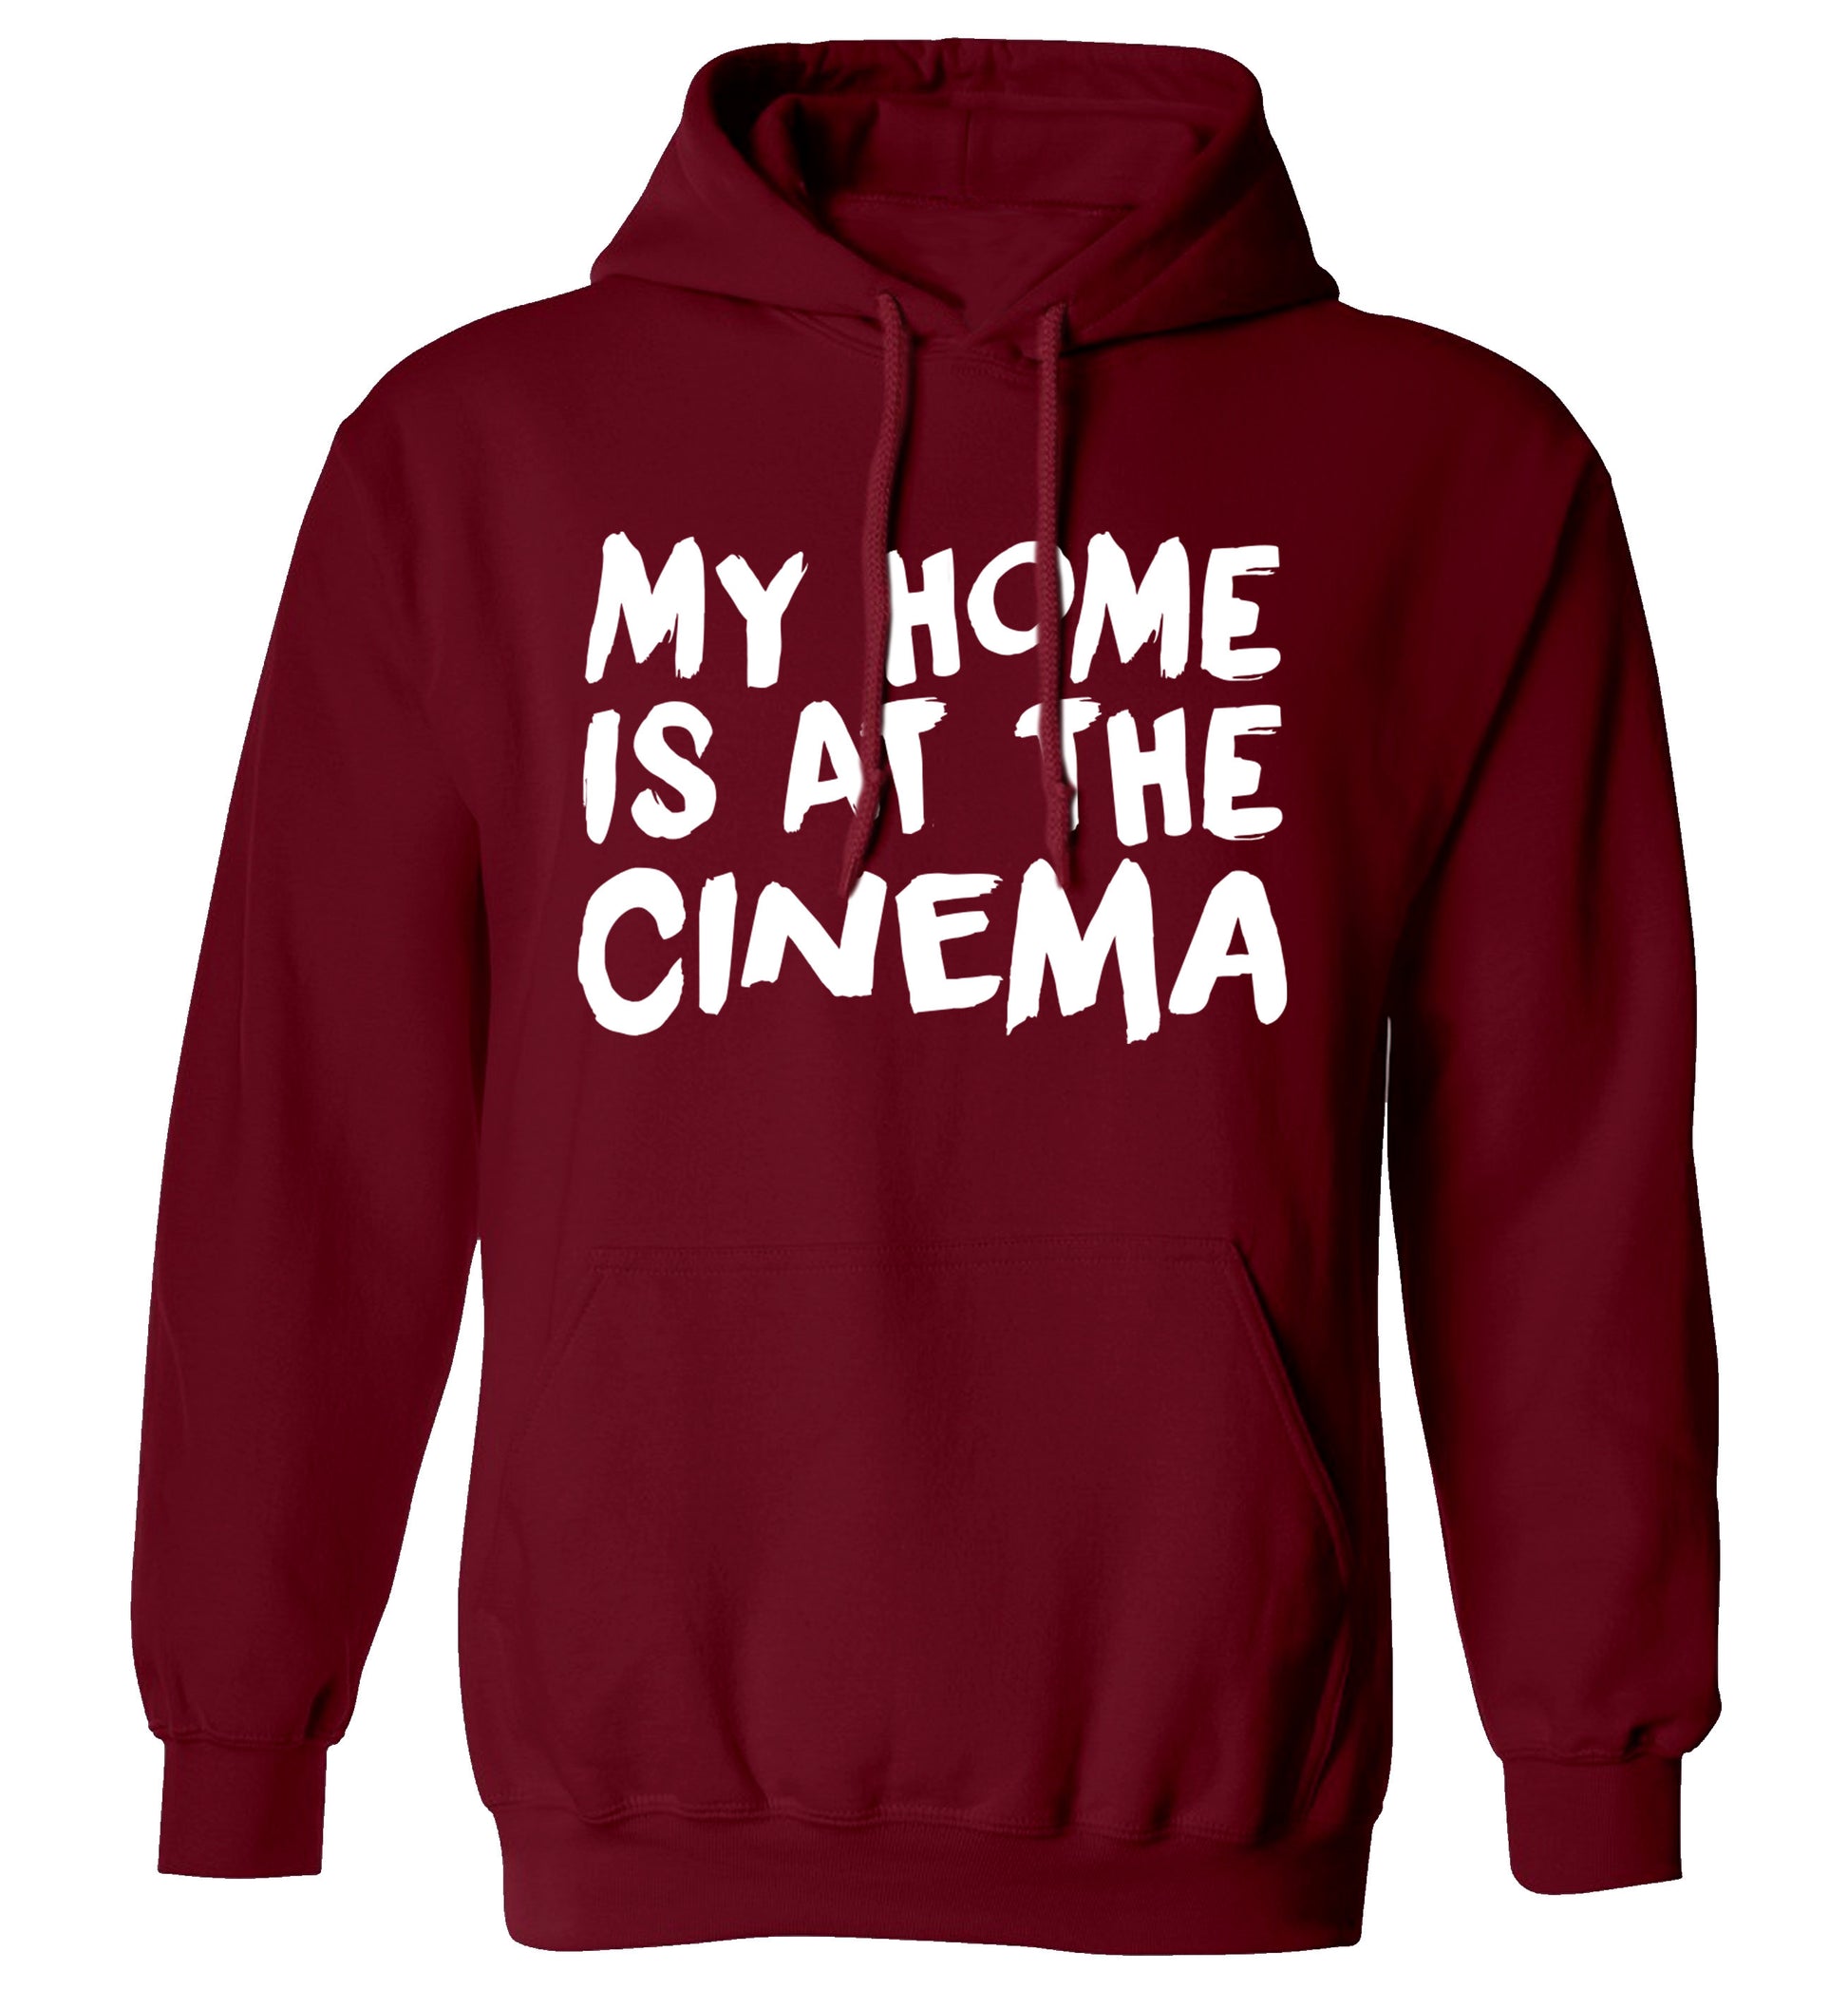 My home is at the cinema adults unisex maroon hoodie 2XL